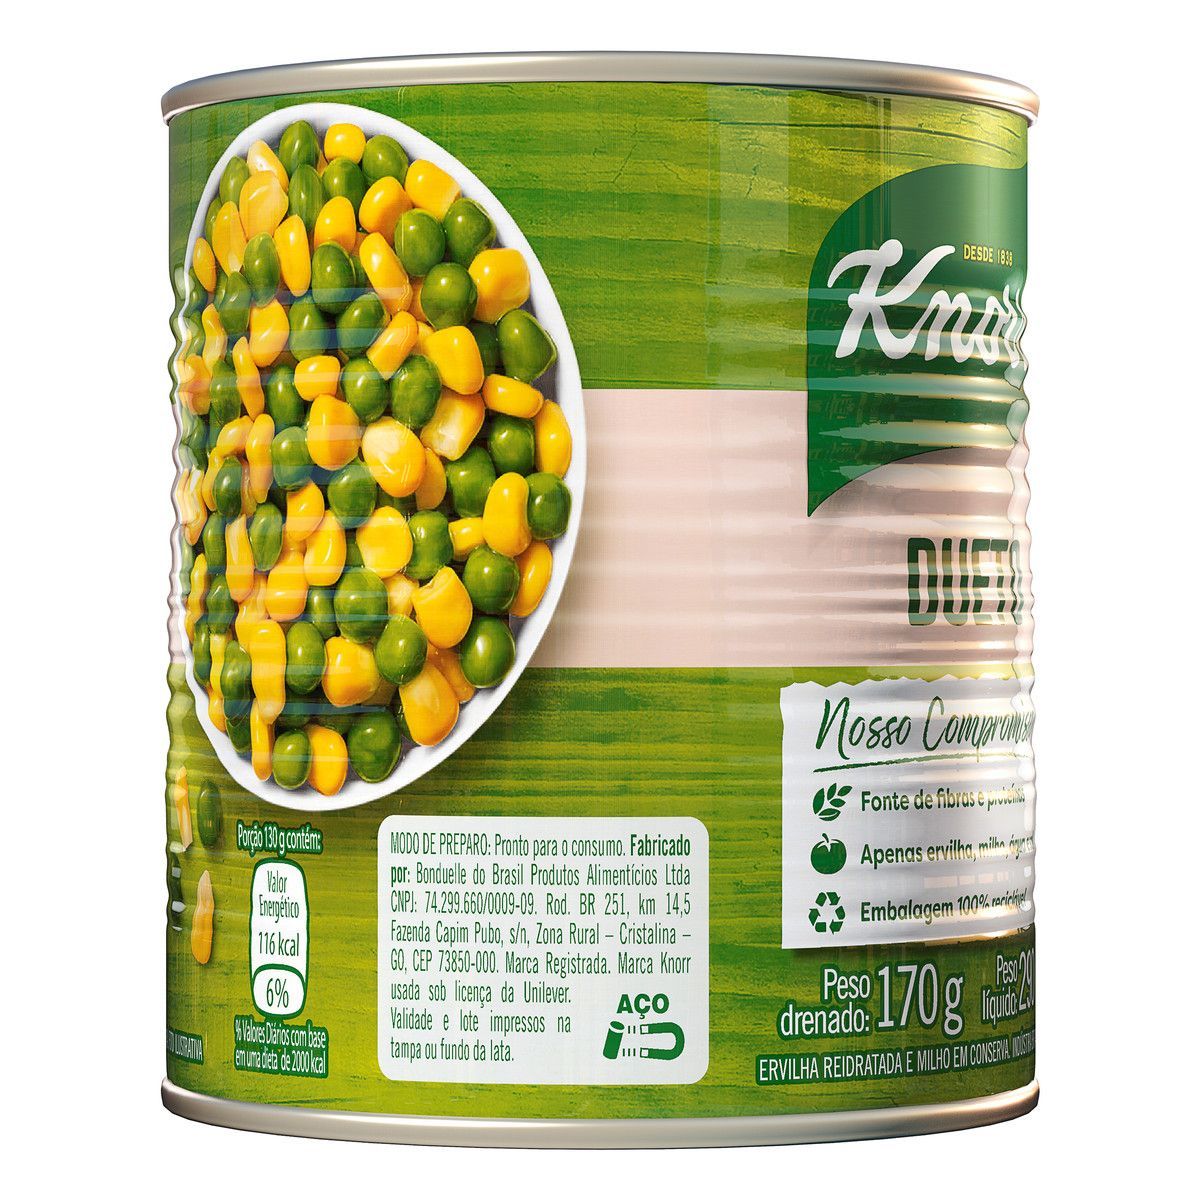 Dueto Knorr 170g image number 3